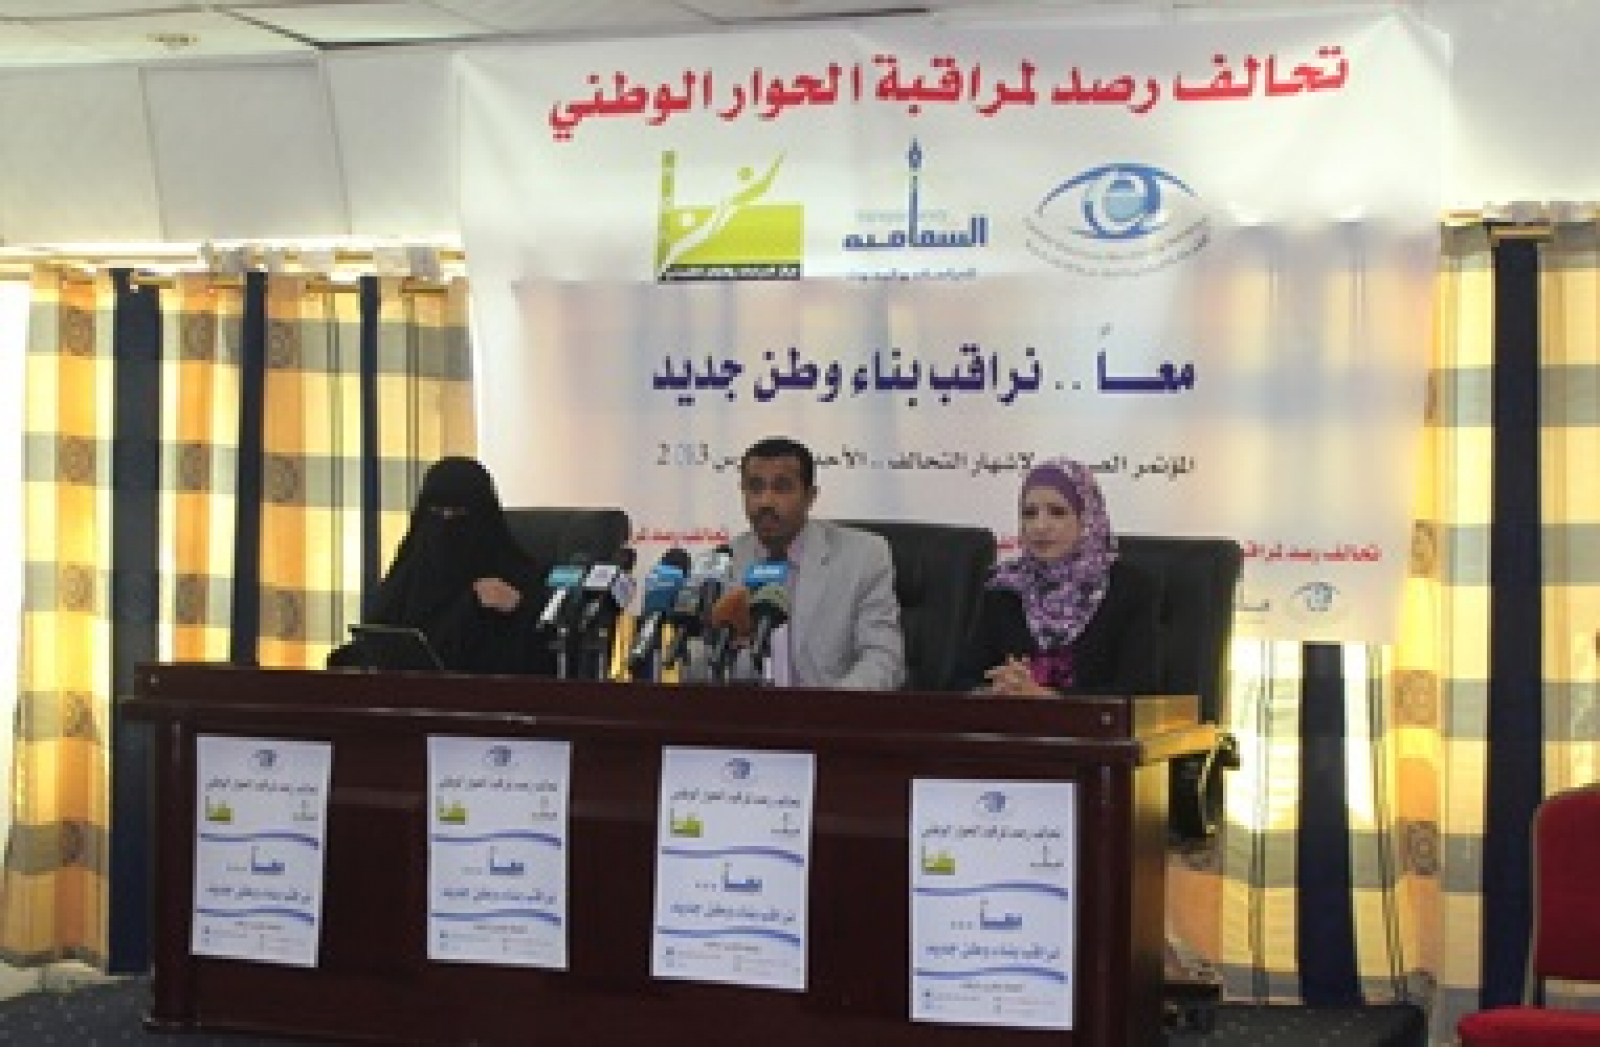 Yemeni Coalition Monitors National Dialogue to Ensure Openness, Transparency